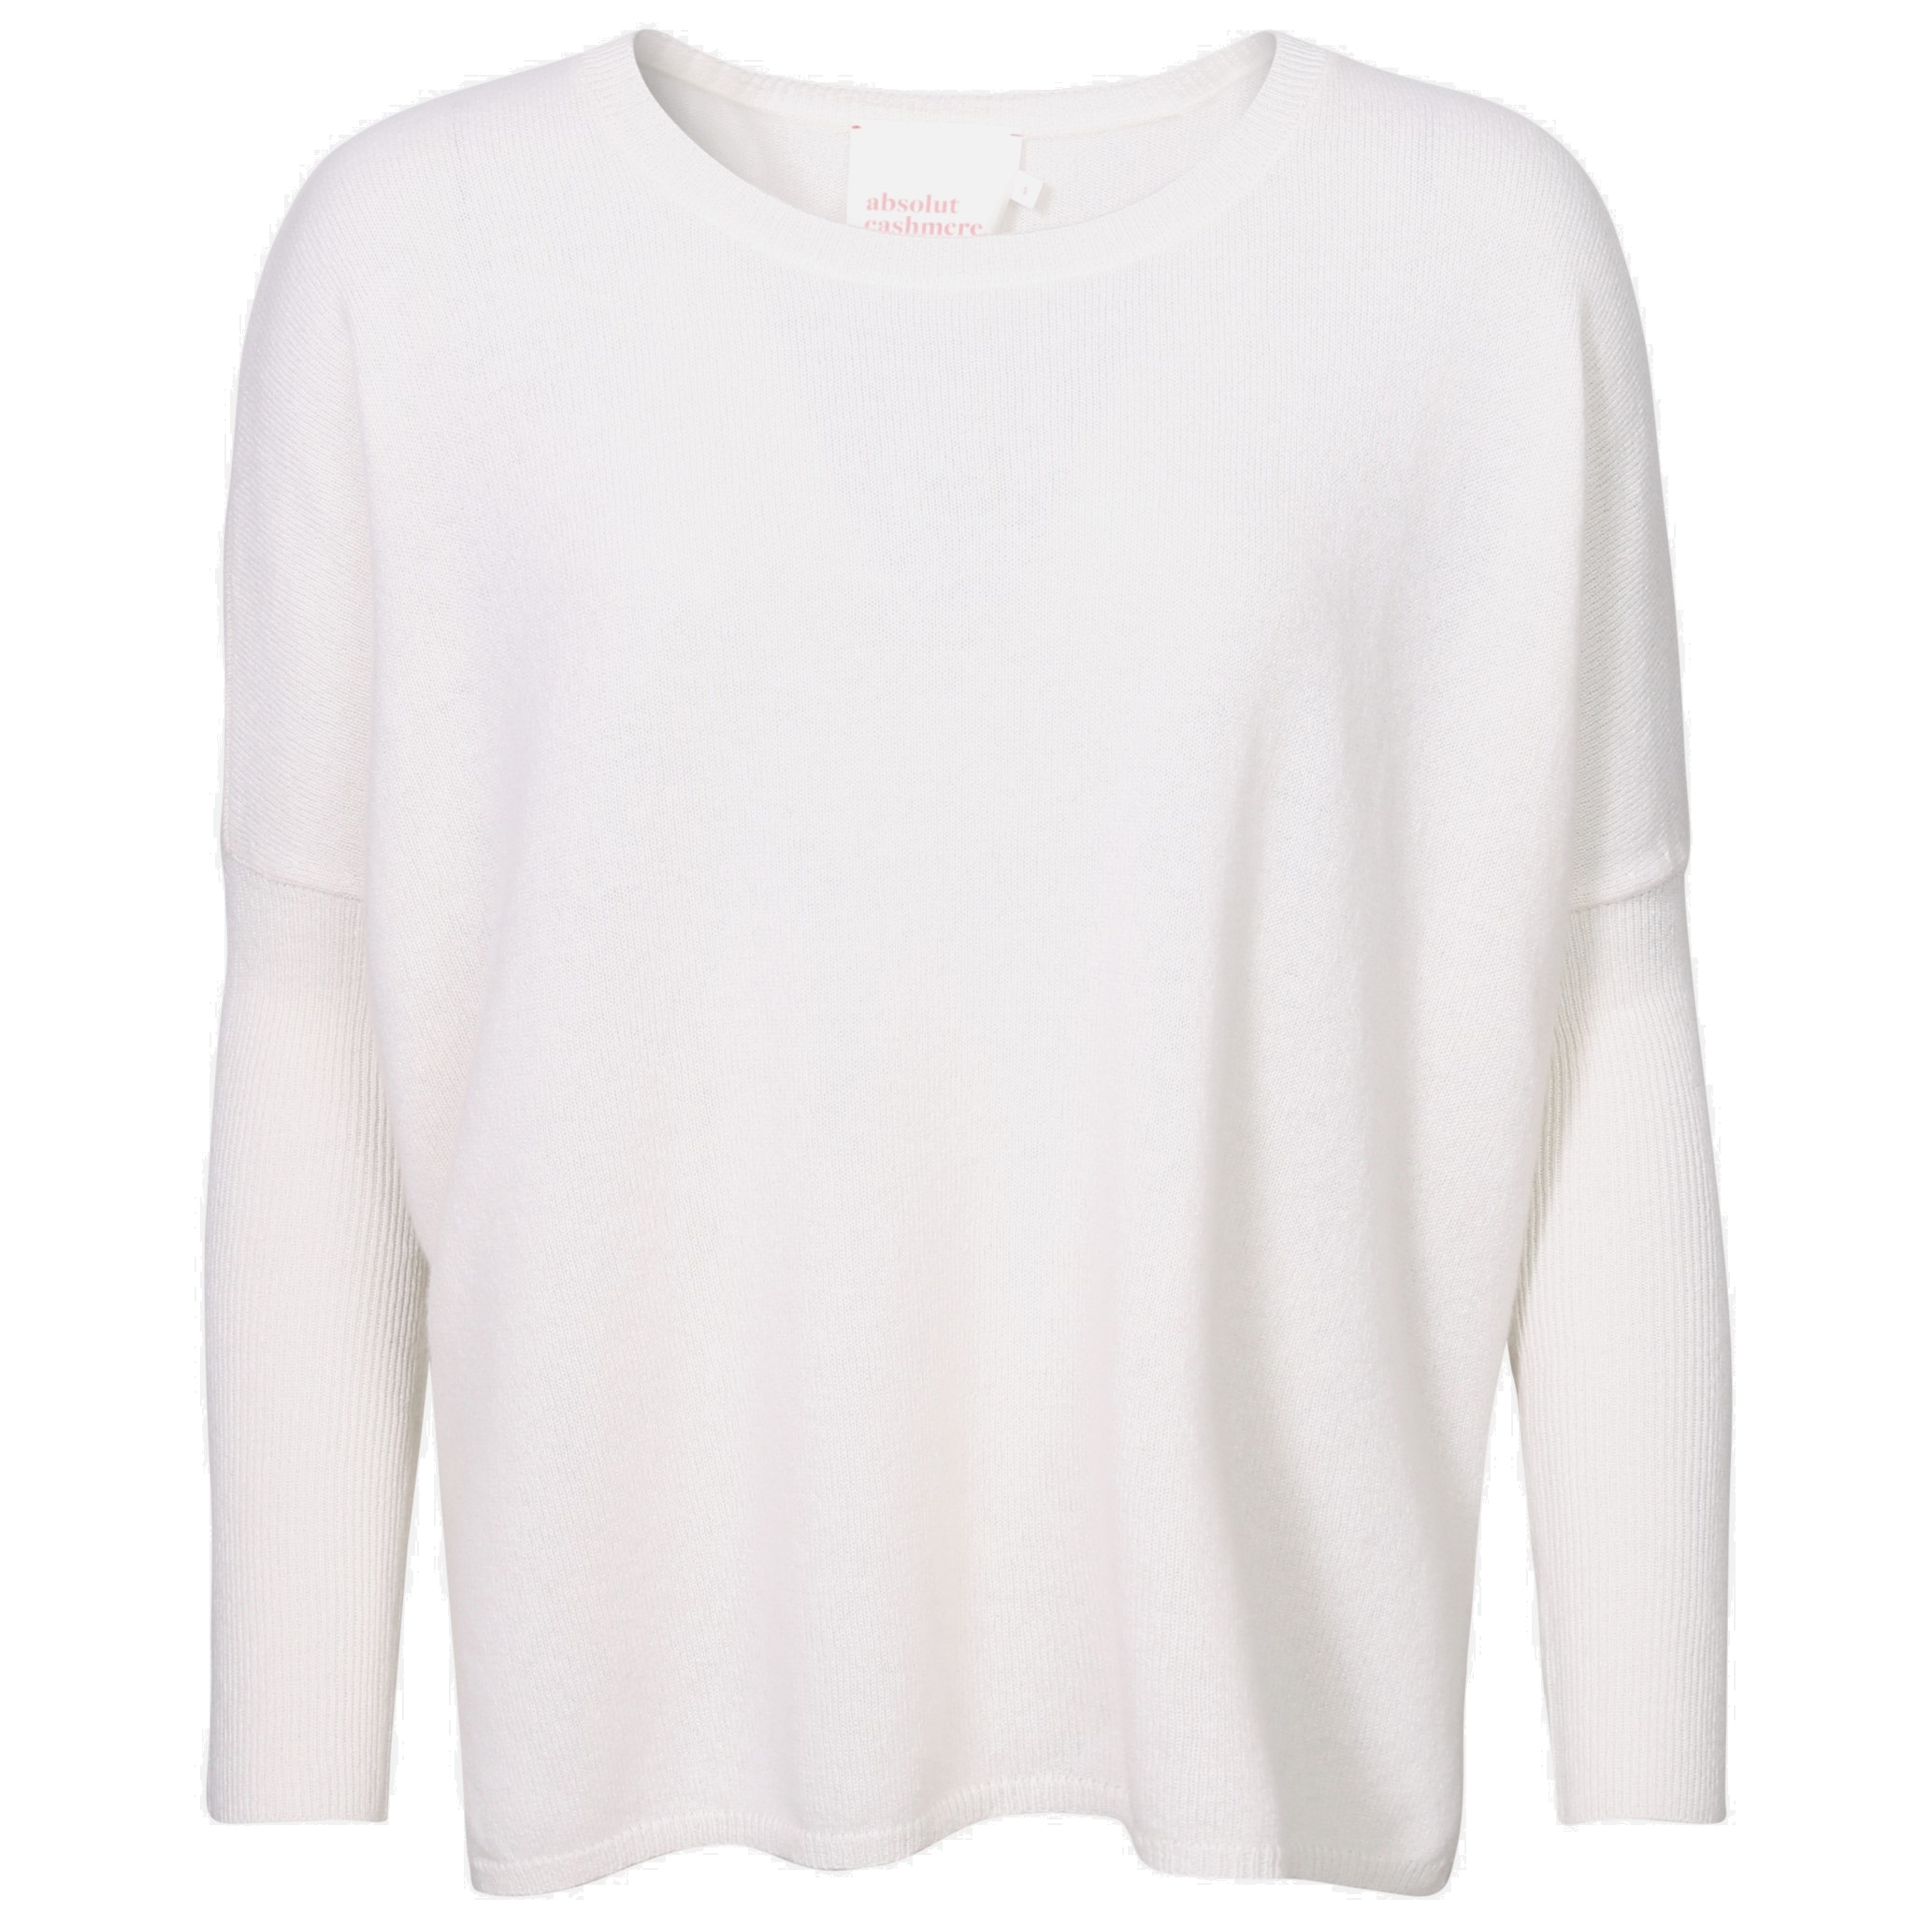 ABSOLUT CASHMERE Poncho Sweater Astrid in Off White M